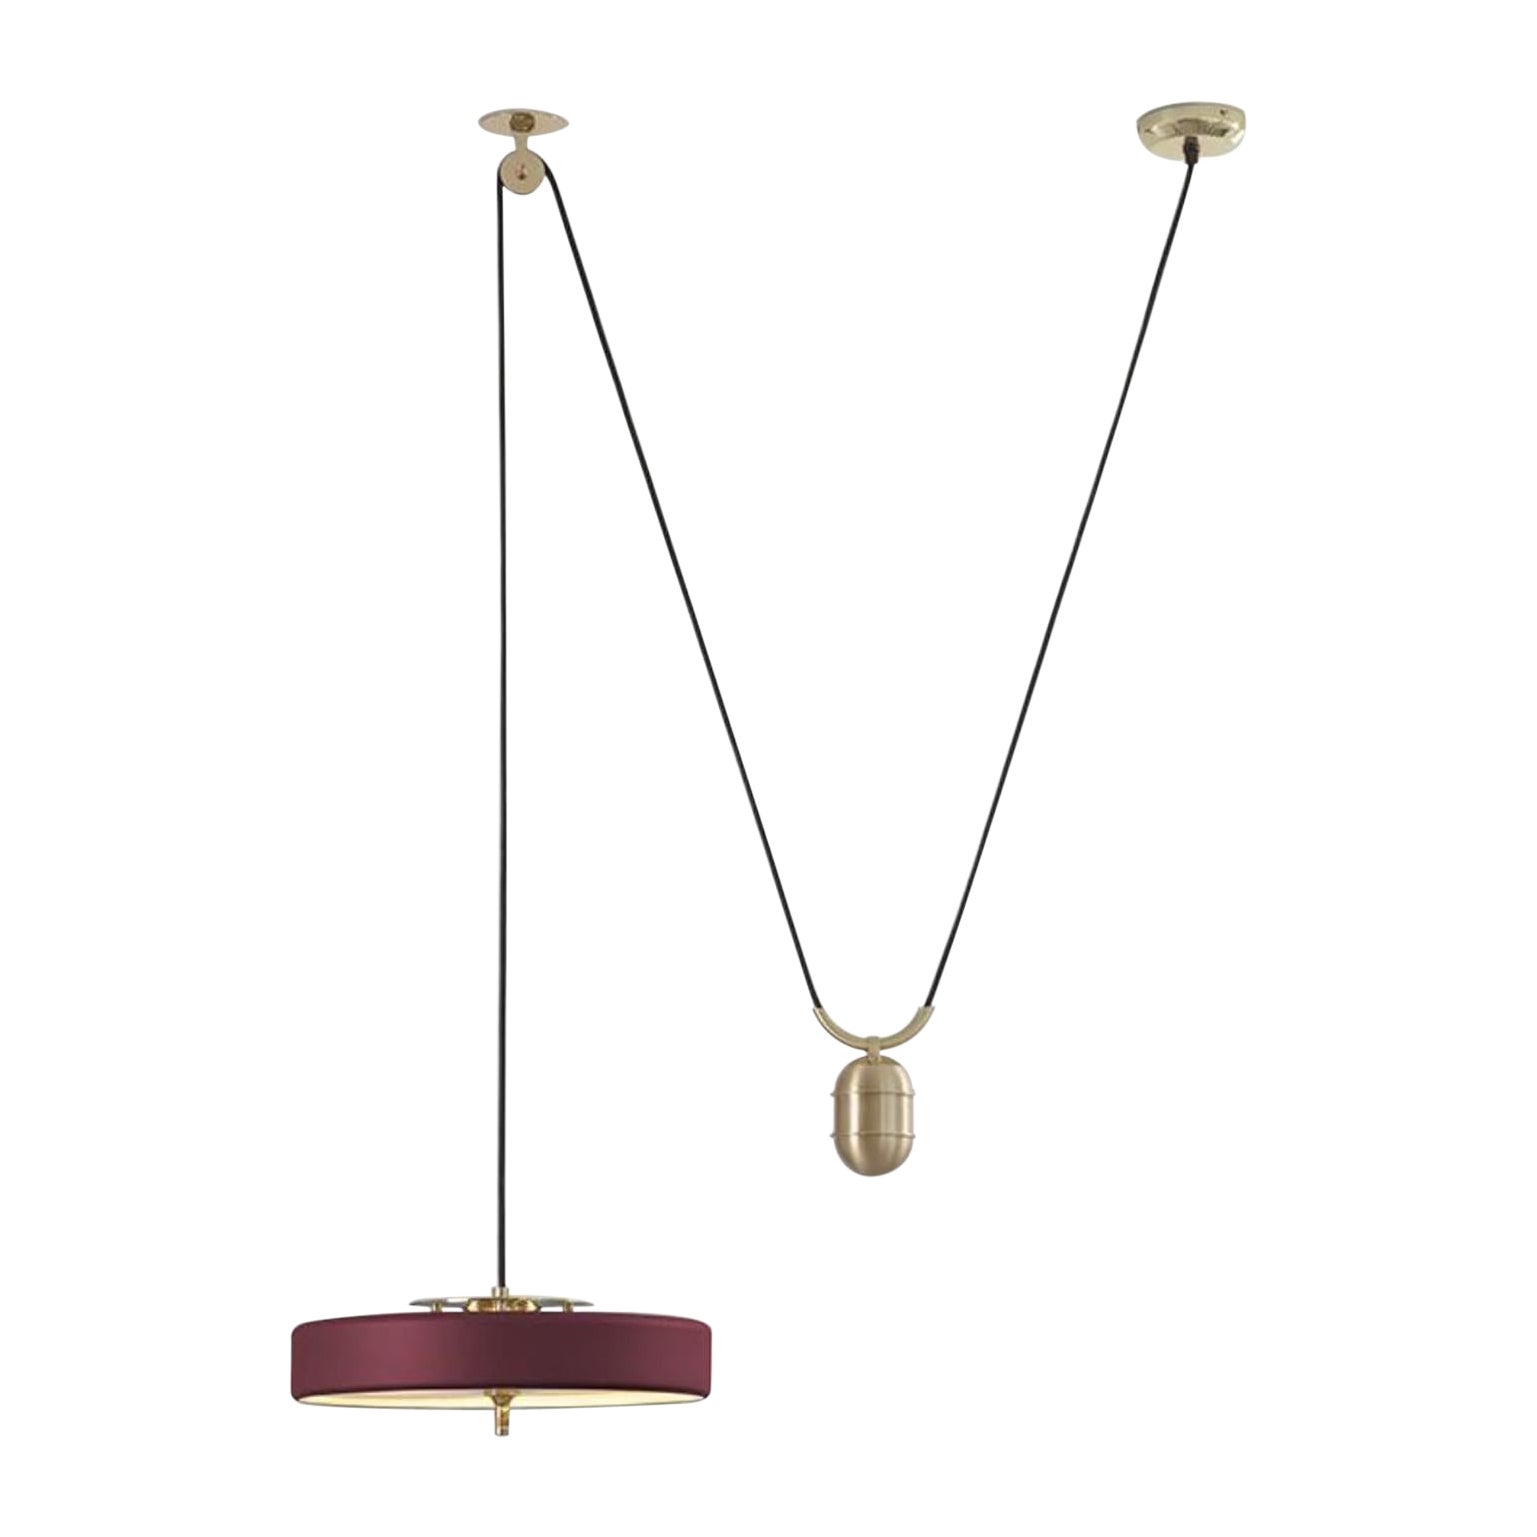 Revolve Rise and Fall Pendant Light, Brushed Brass, Oxblood by Bert Frank